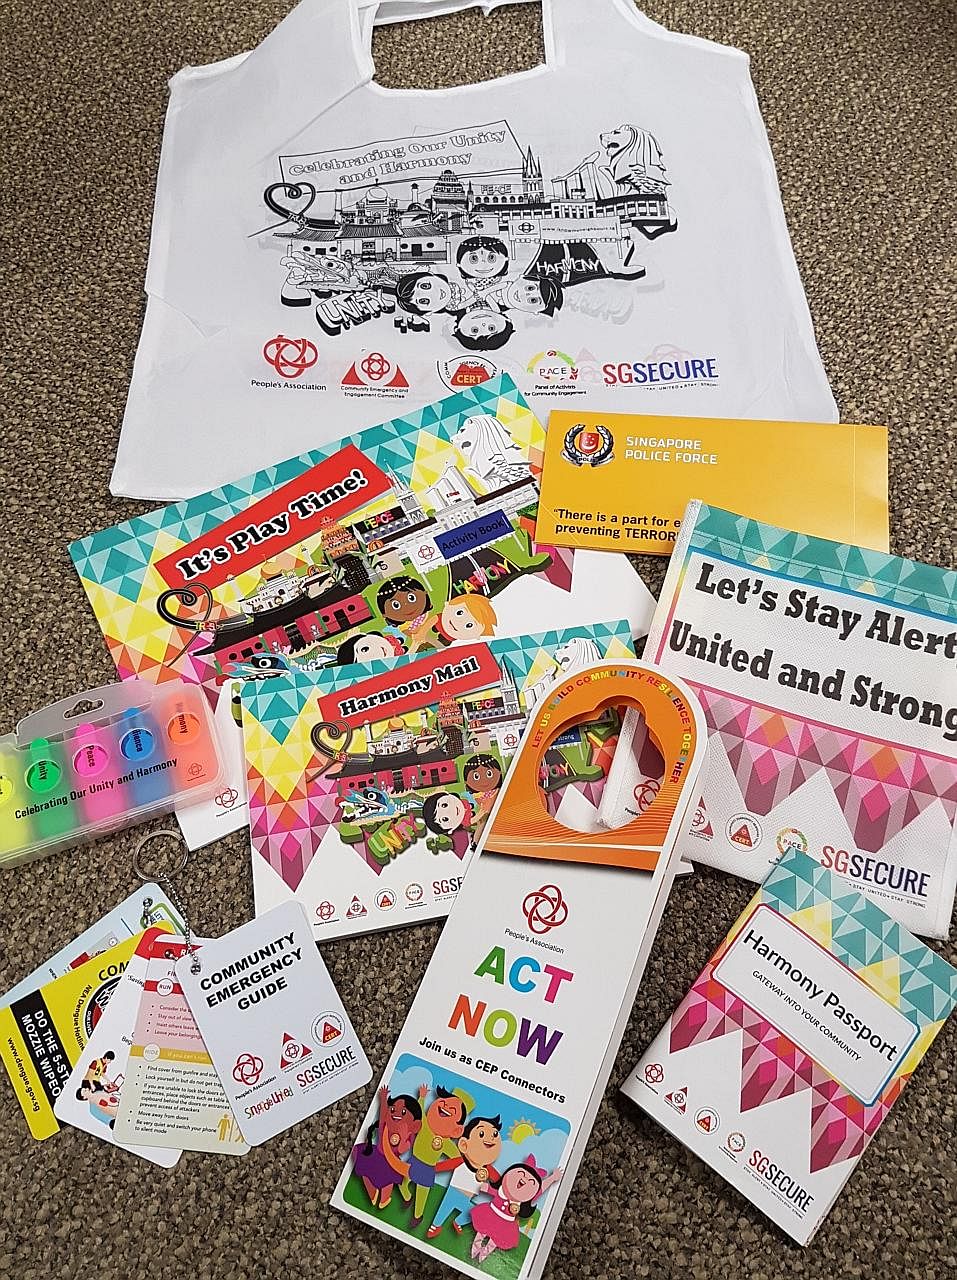 Harmony Packs for the block parties will contain fun items like postcards and notes with which to greet neighbours on special festivals, as well as useful guides on community emergency information and terrorism.